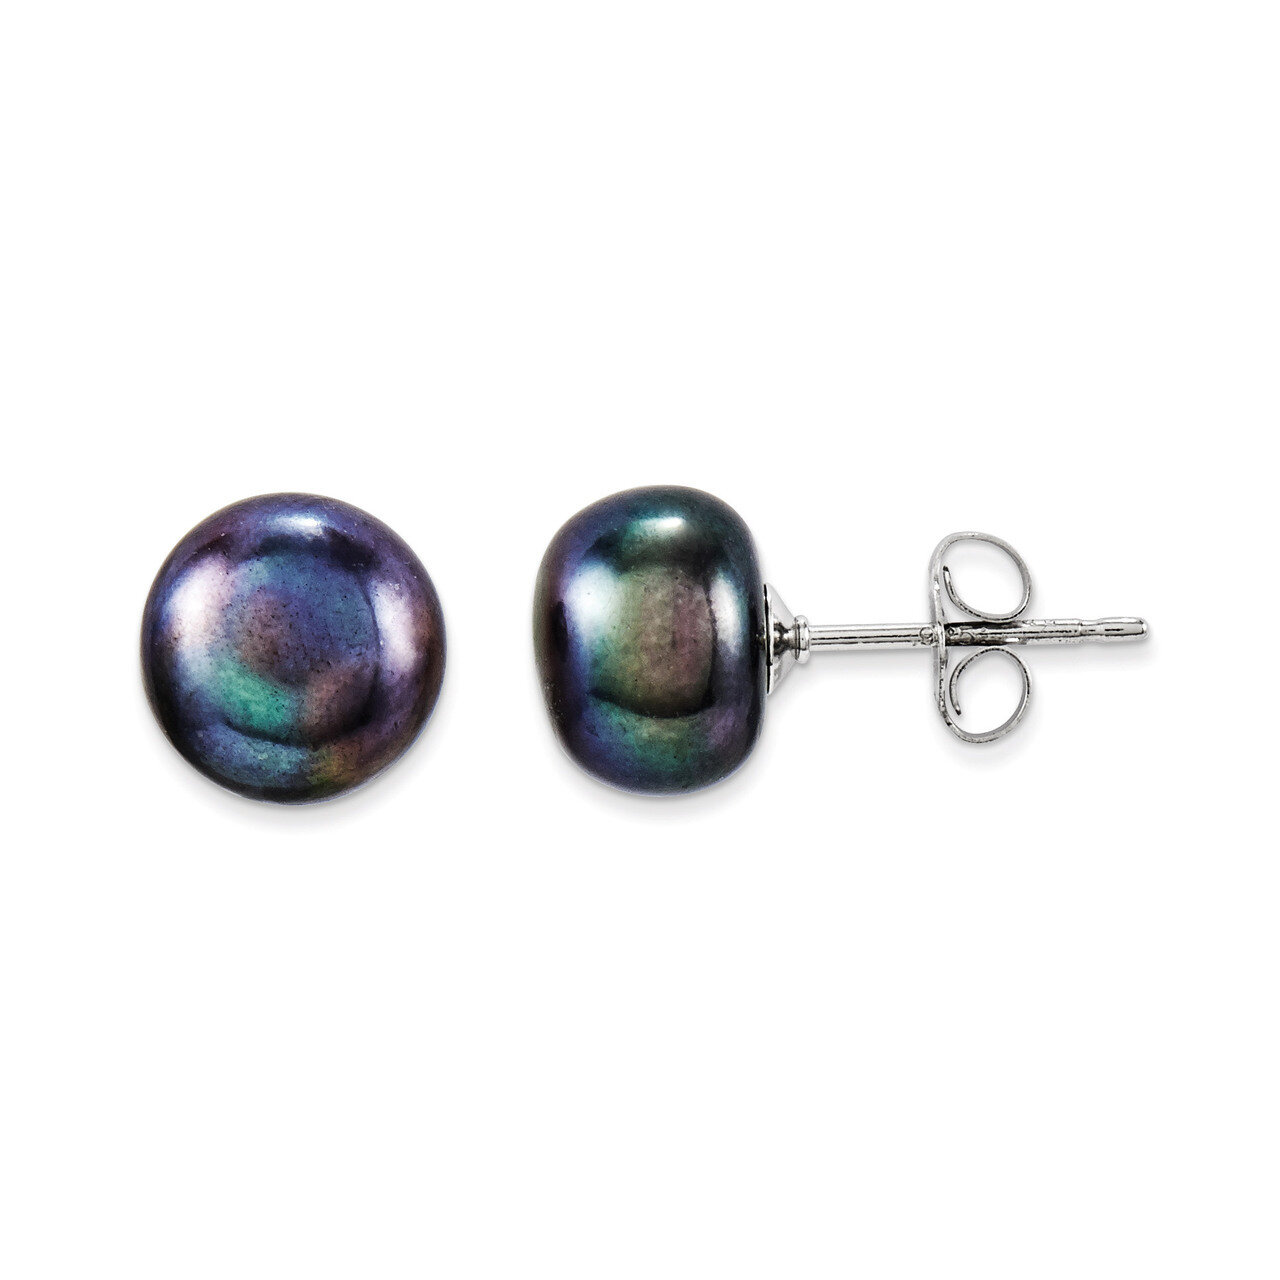 8-9mm Black Cultured Button Pearl Stud Earrings Sterling Silver QE7699